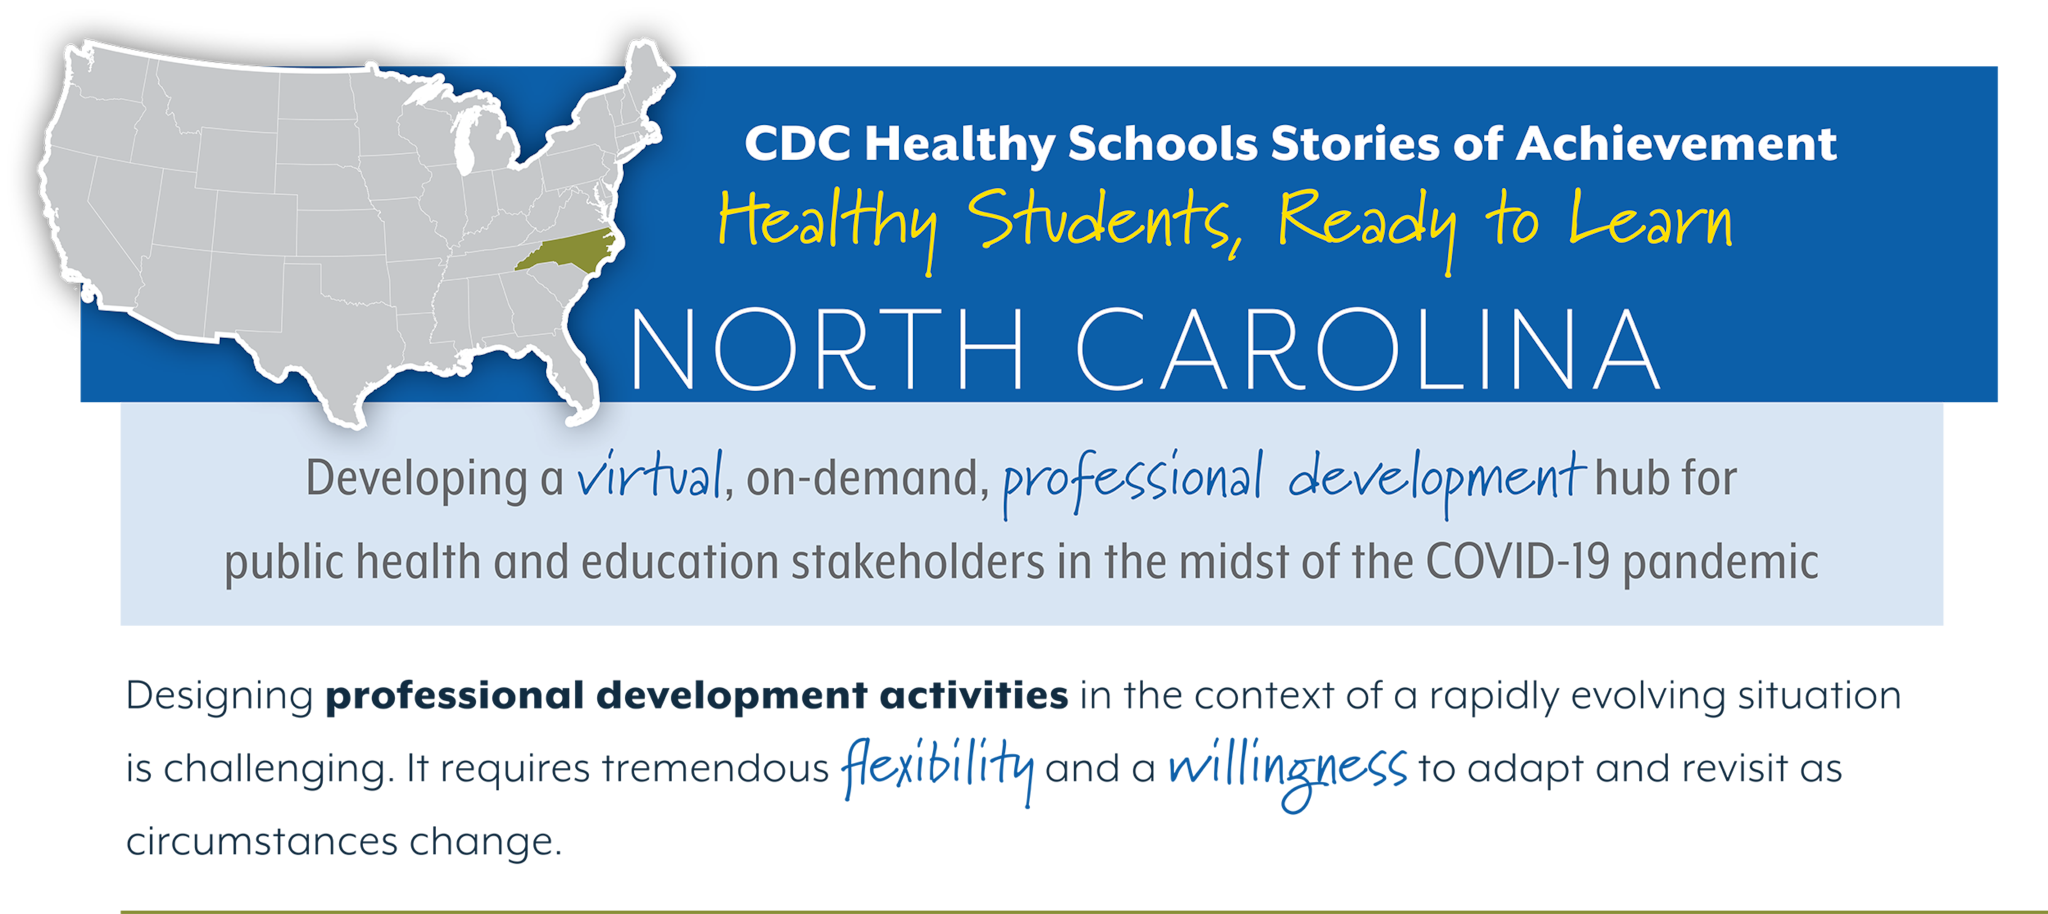 CDC Healthy Schools Stories of Achievement  Healthy Students, Ready to Learn  NORTH CAROLINA  Developing a virtual, on-demand, professional development hub for  public health and education stakeholders in the midst of the COVID-19 pandemic  Designing professional development activities in the context of a rapidly evolving situation  is challenging. It requires tremendous flexibility and a willingness to adapt and revisit as  circumstances change. 